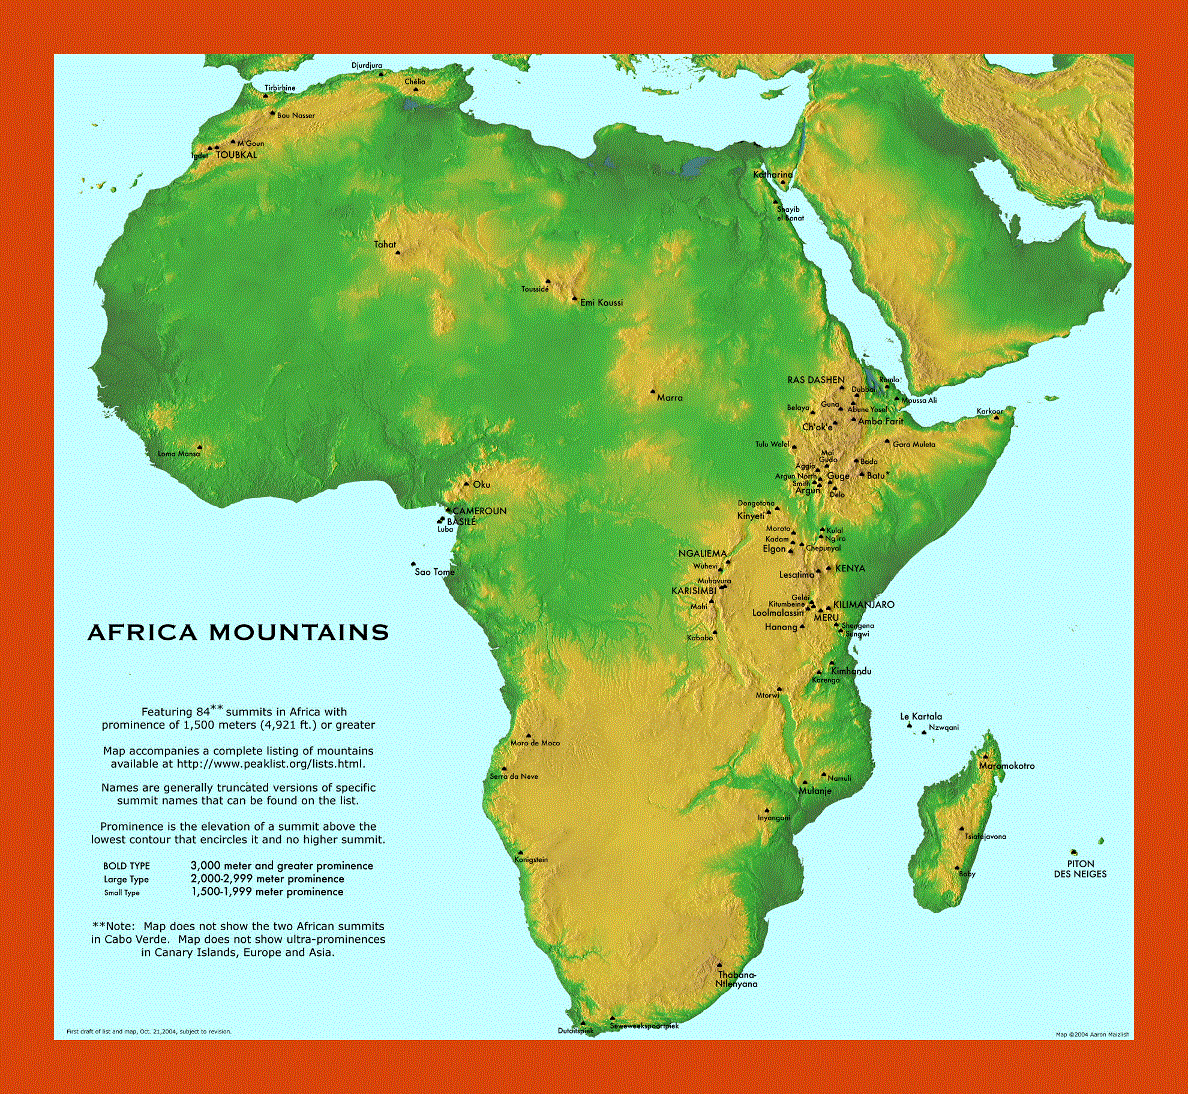 Africa mountains map